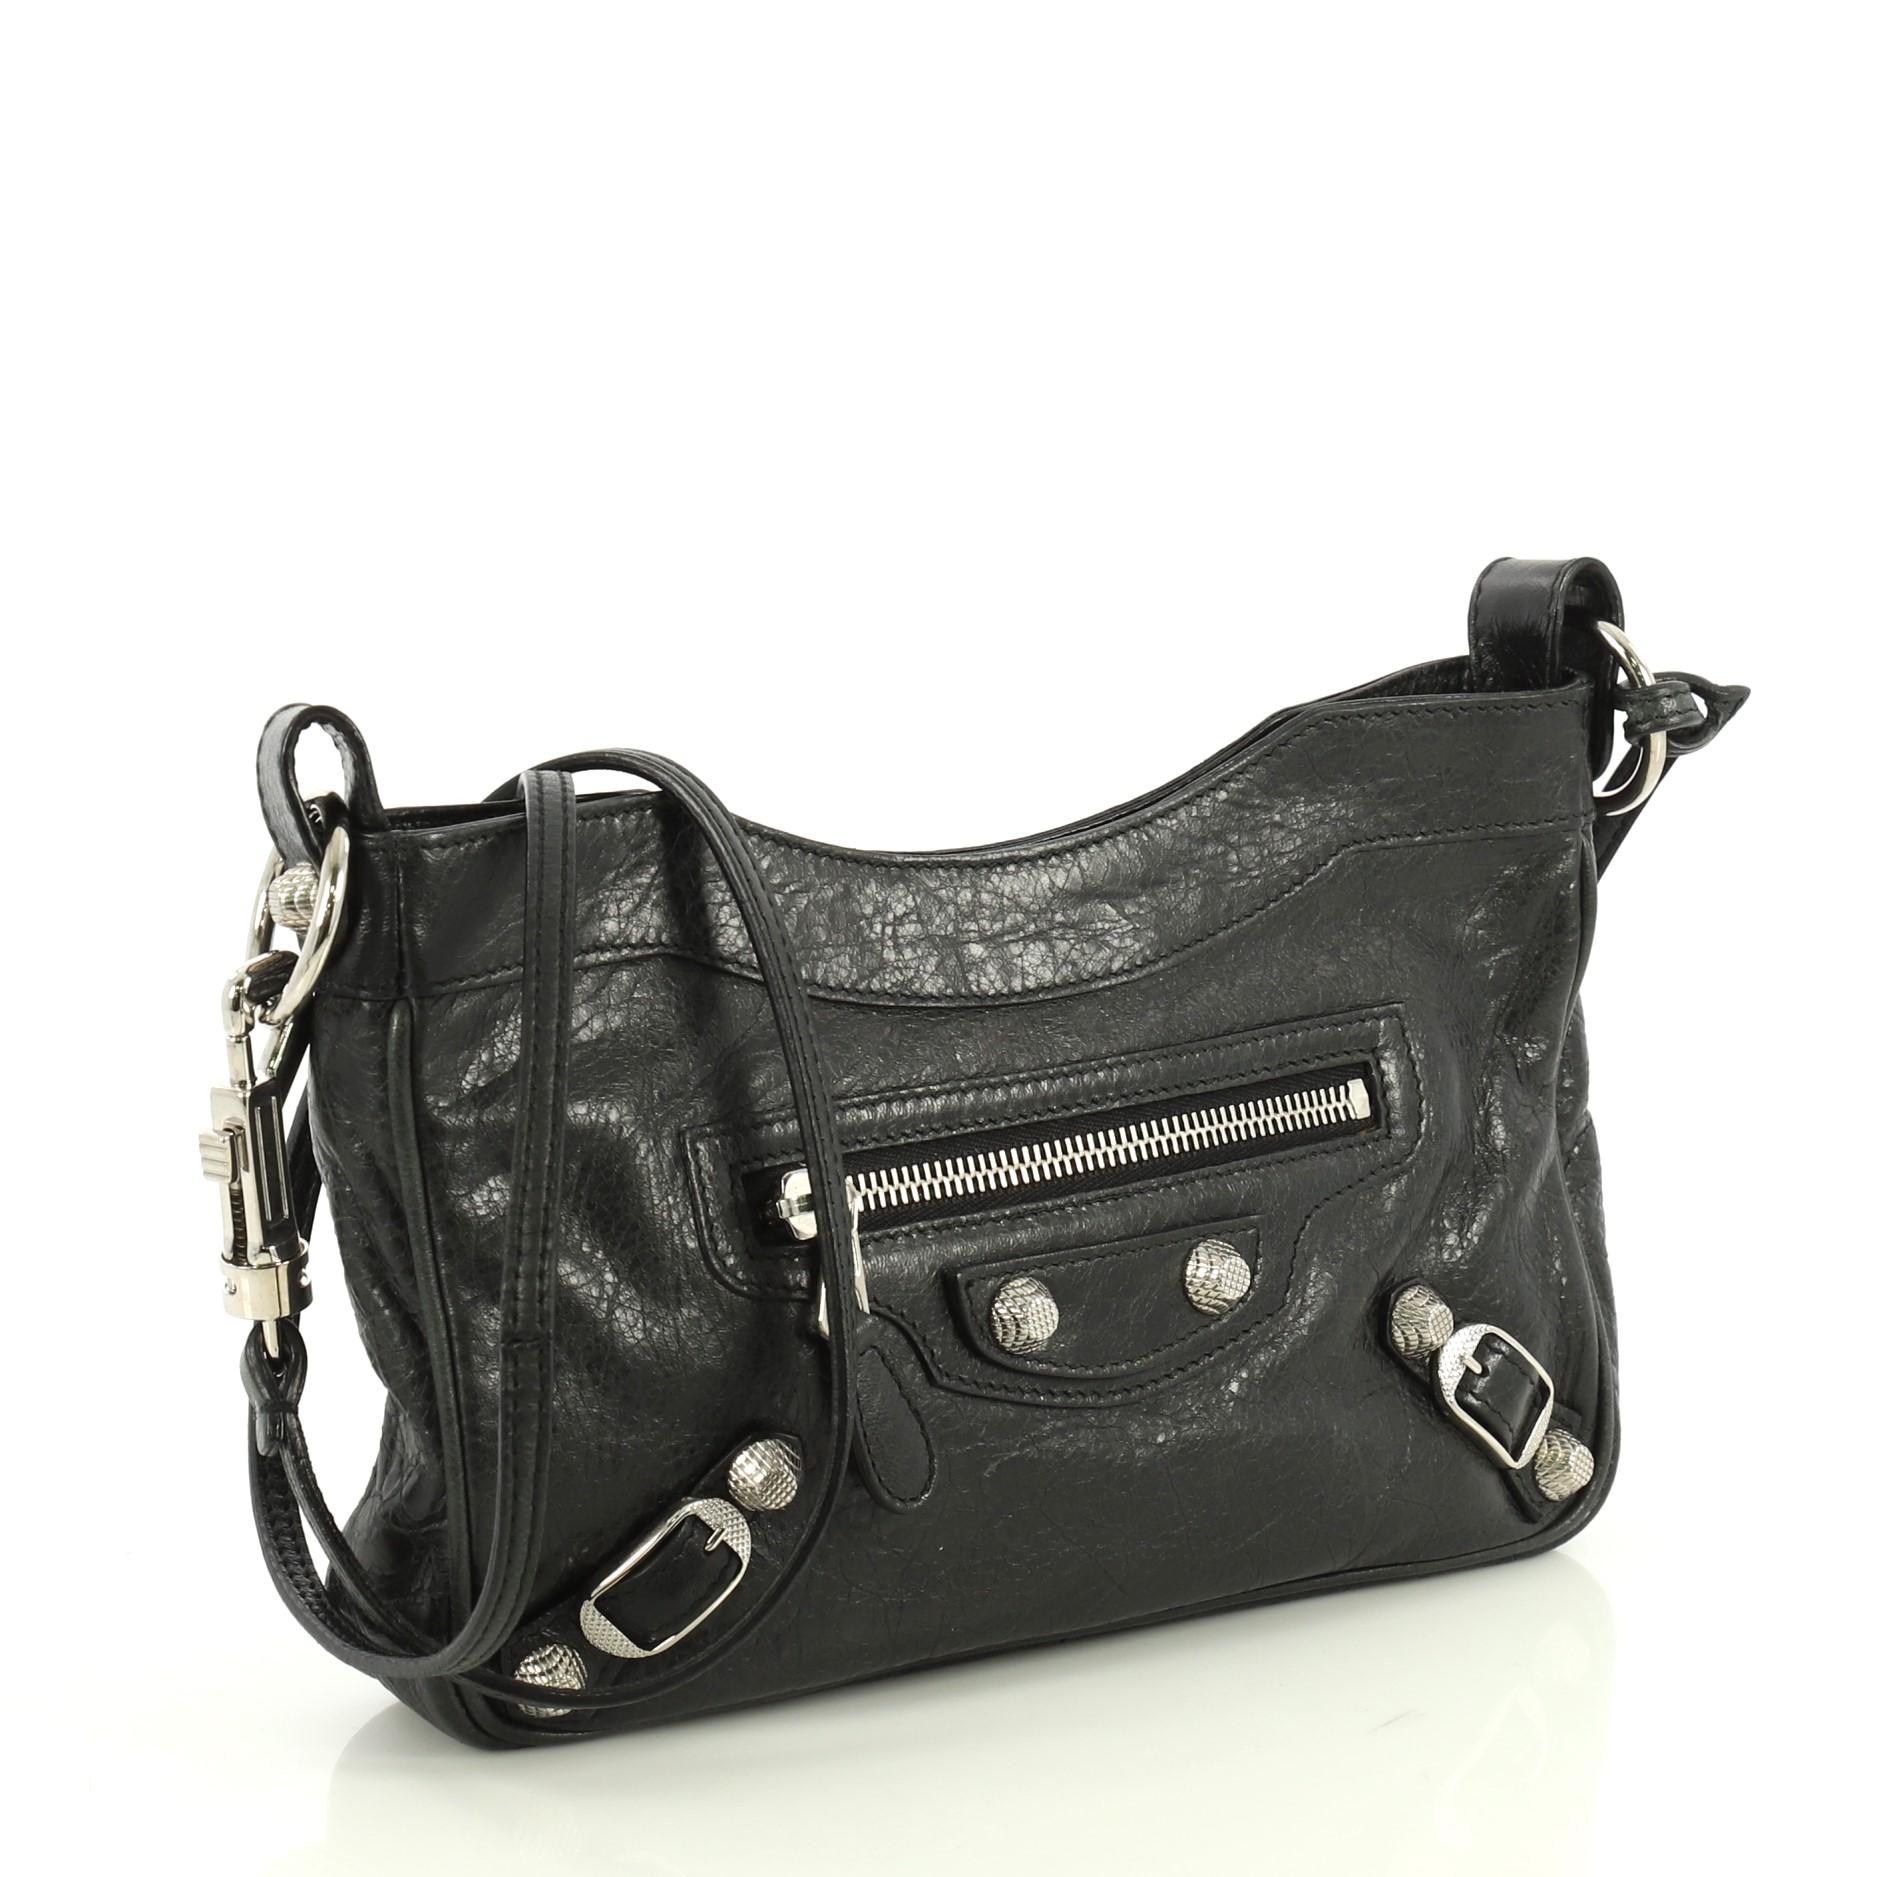 This Balenciaga Hip Giant Studs Crossbody Bag Leather, crafted from black leather, features a long adjustable leather strap, front zip pocket, giant studs and buckle details, and silver-tone hardware. Its top zip closure opens to a black fabric